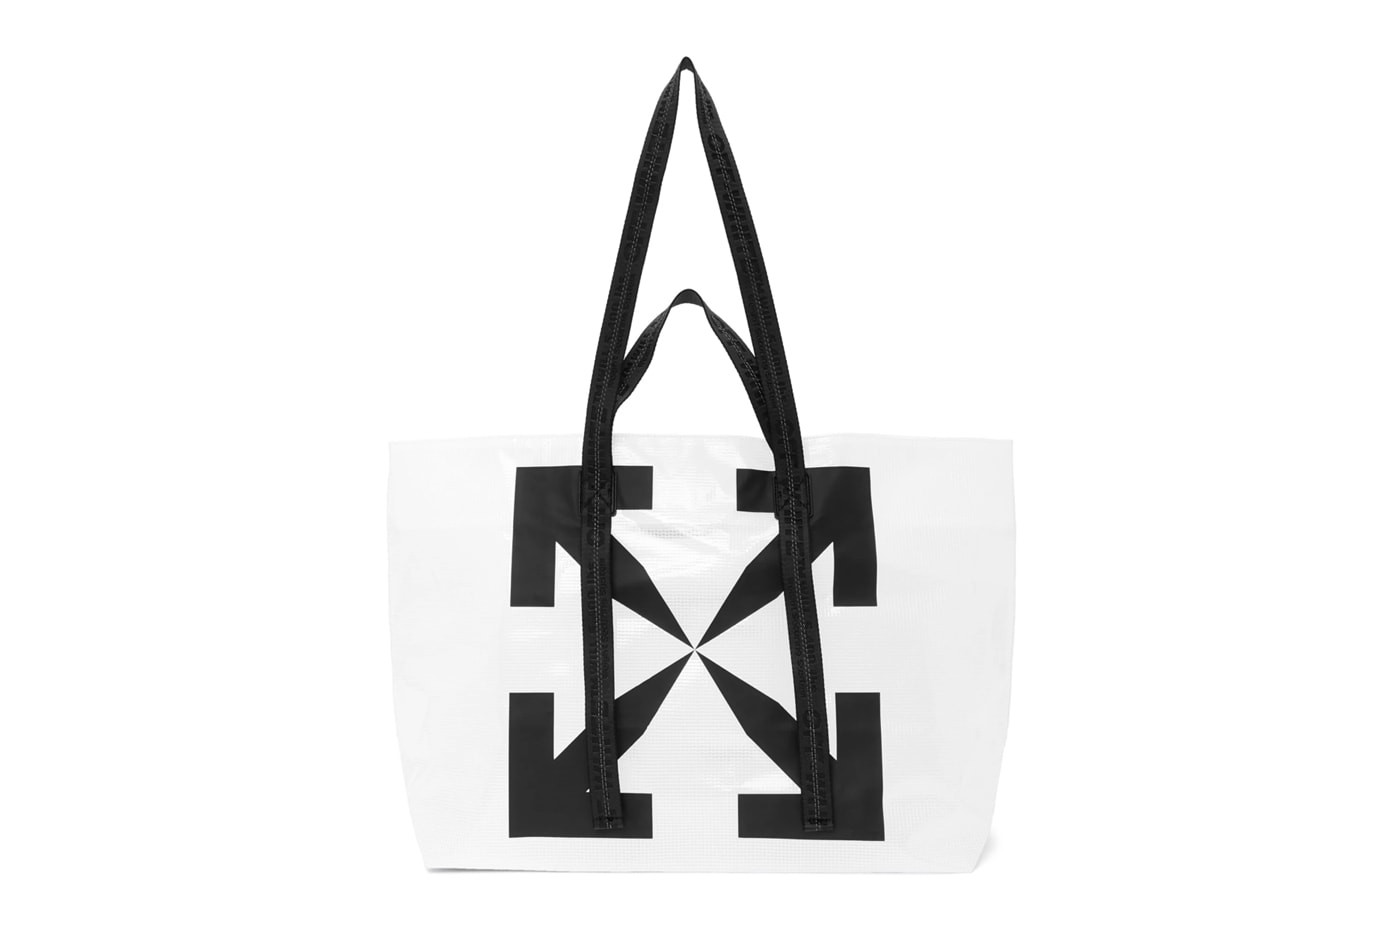 Off-White Block Pouch Leather Shoulder Bag - Farfetch